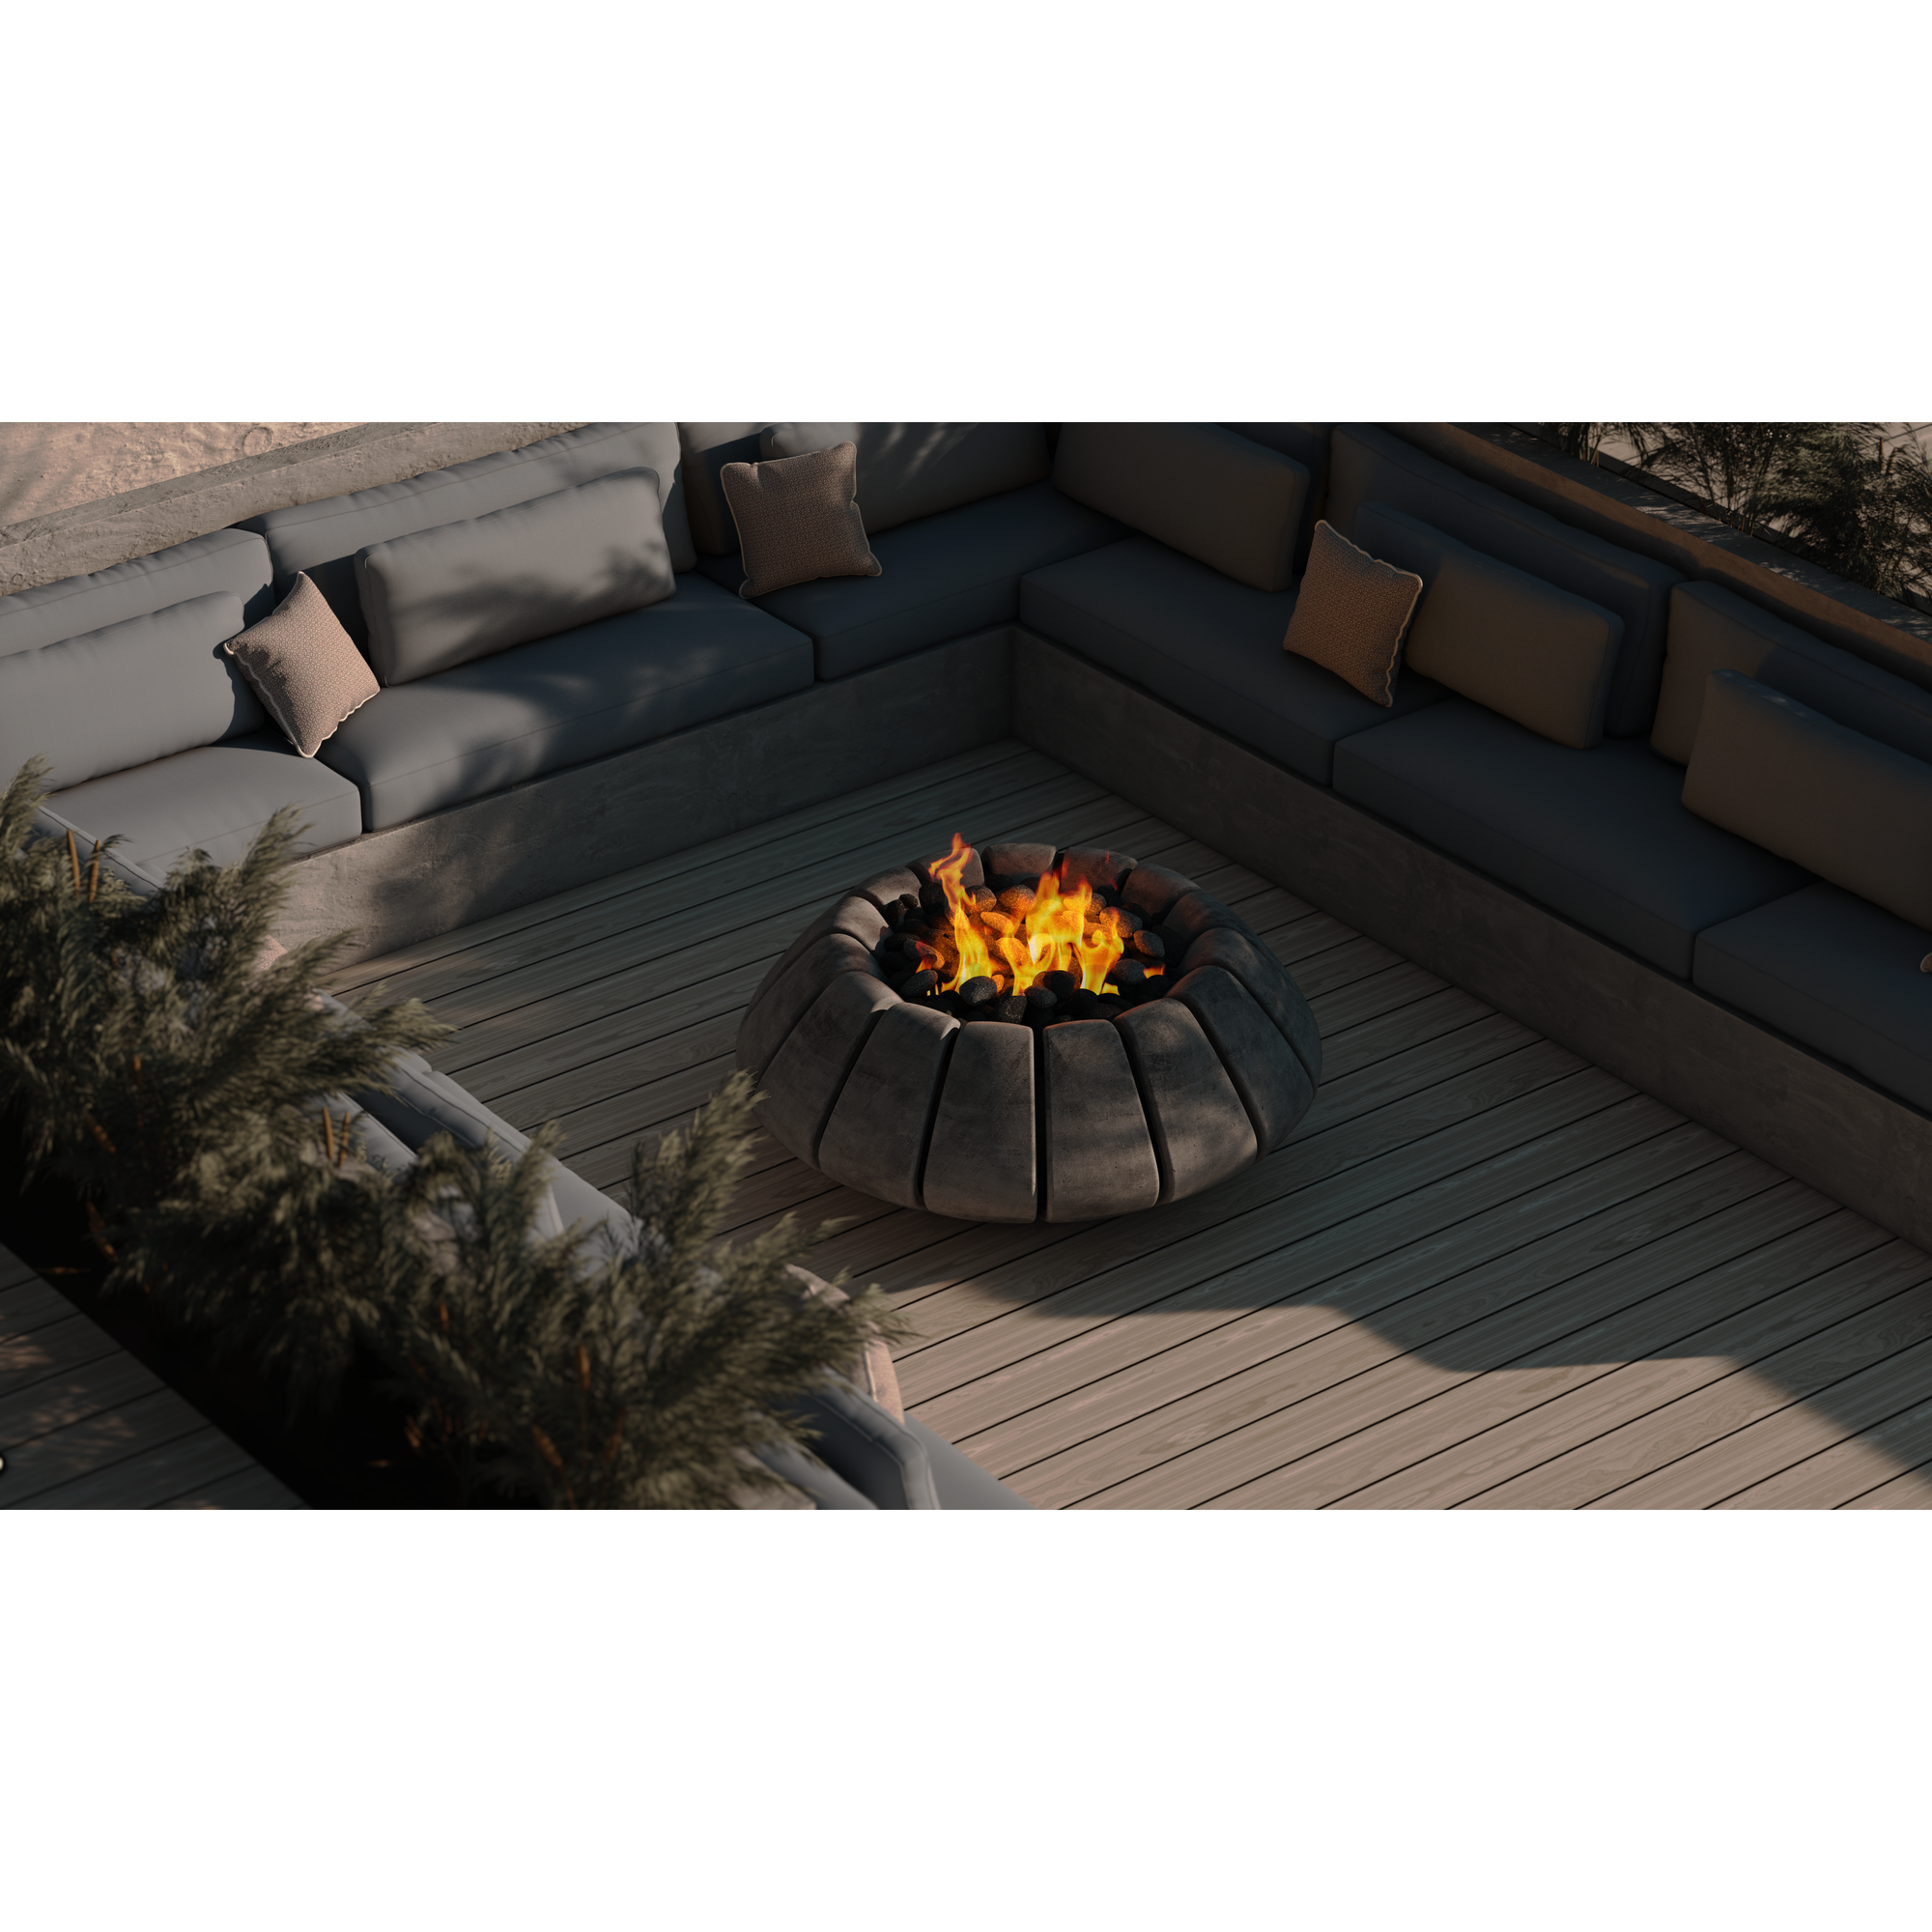 Sunflower Fire Pit in GFRC Concrete by Prism Hardscapes - Majestic Fountains and More.